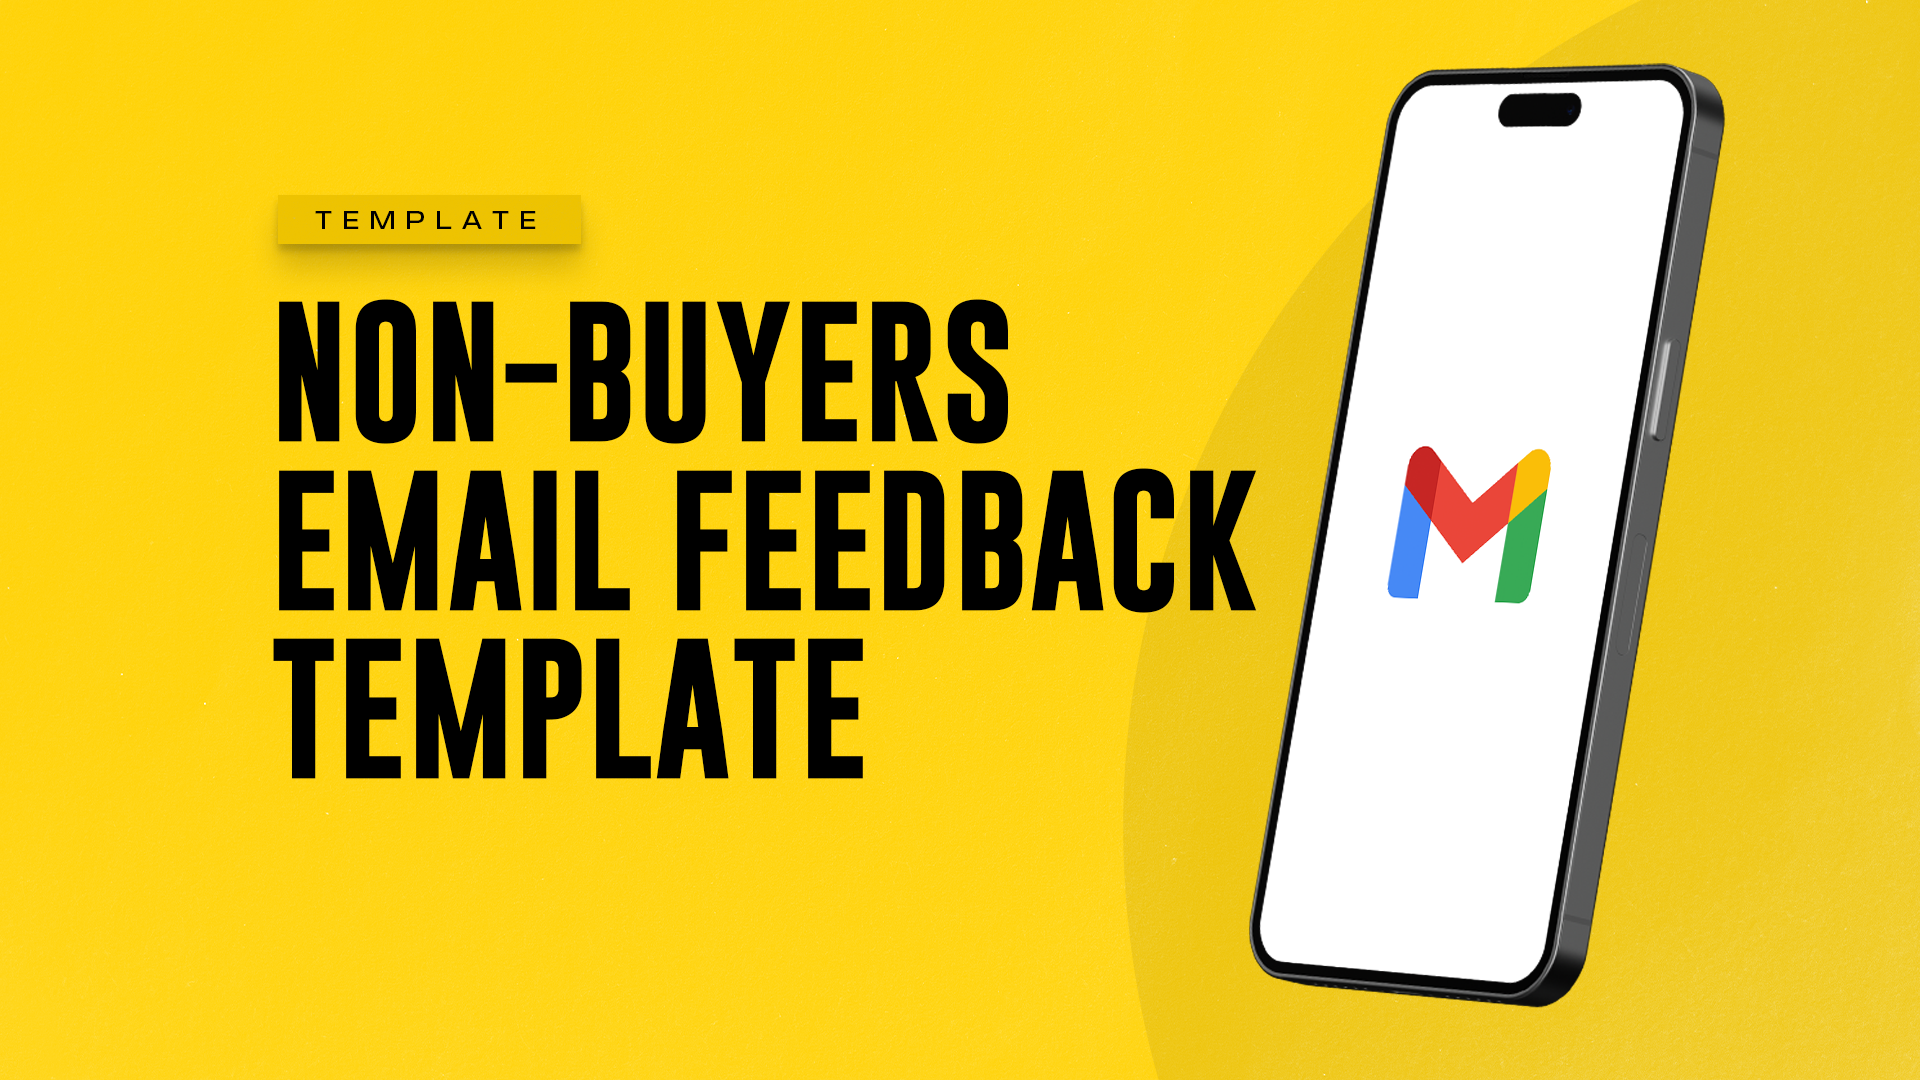 Non-buyers Email Feedback Template.png